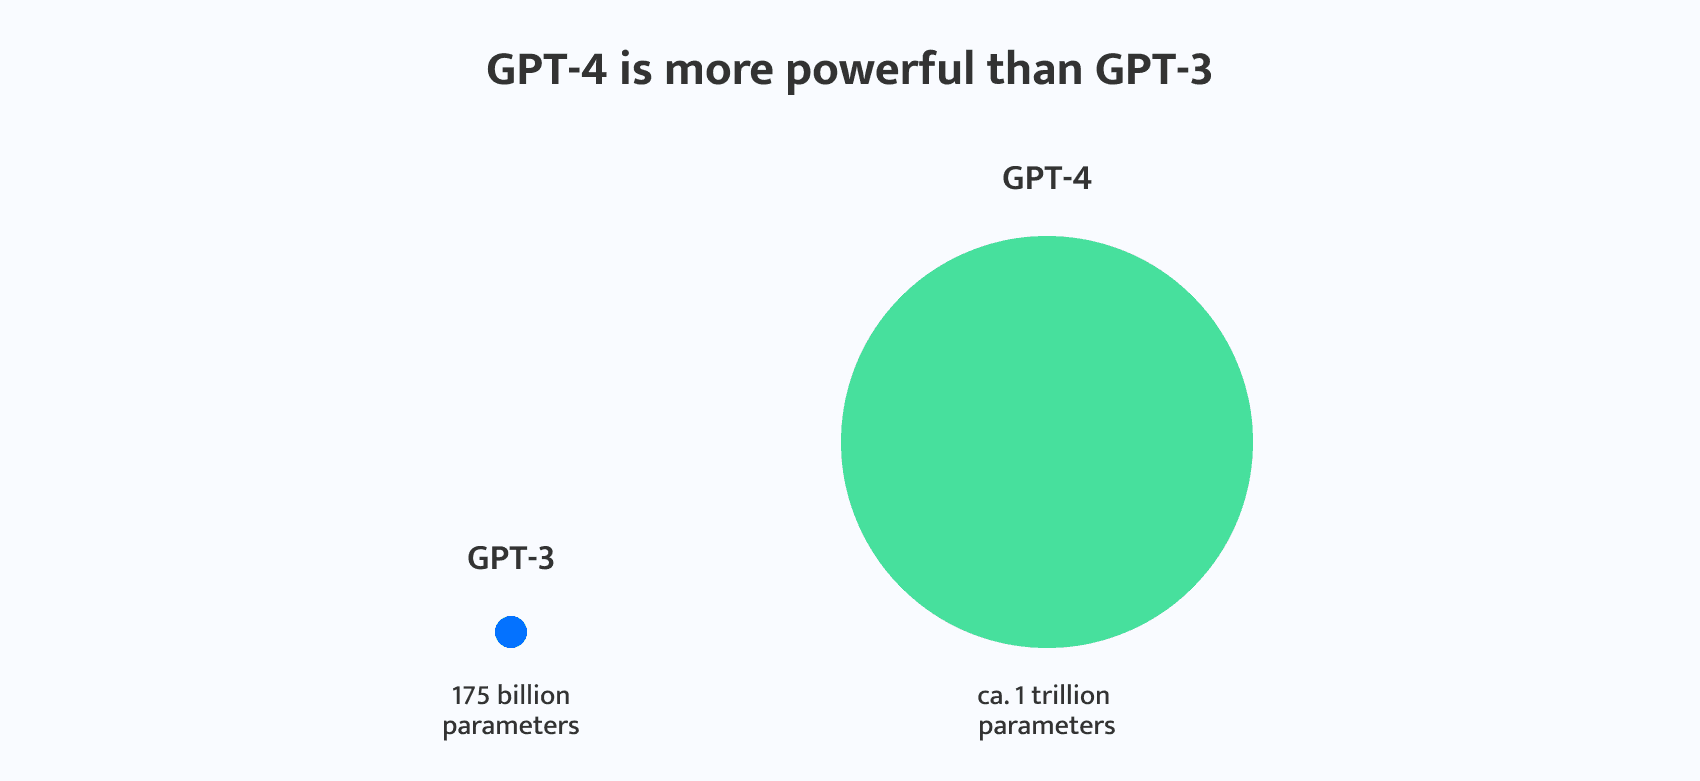 GPT-4 is powerful than GPT-3